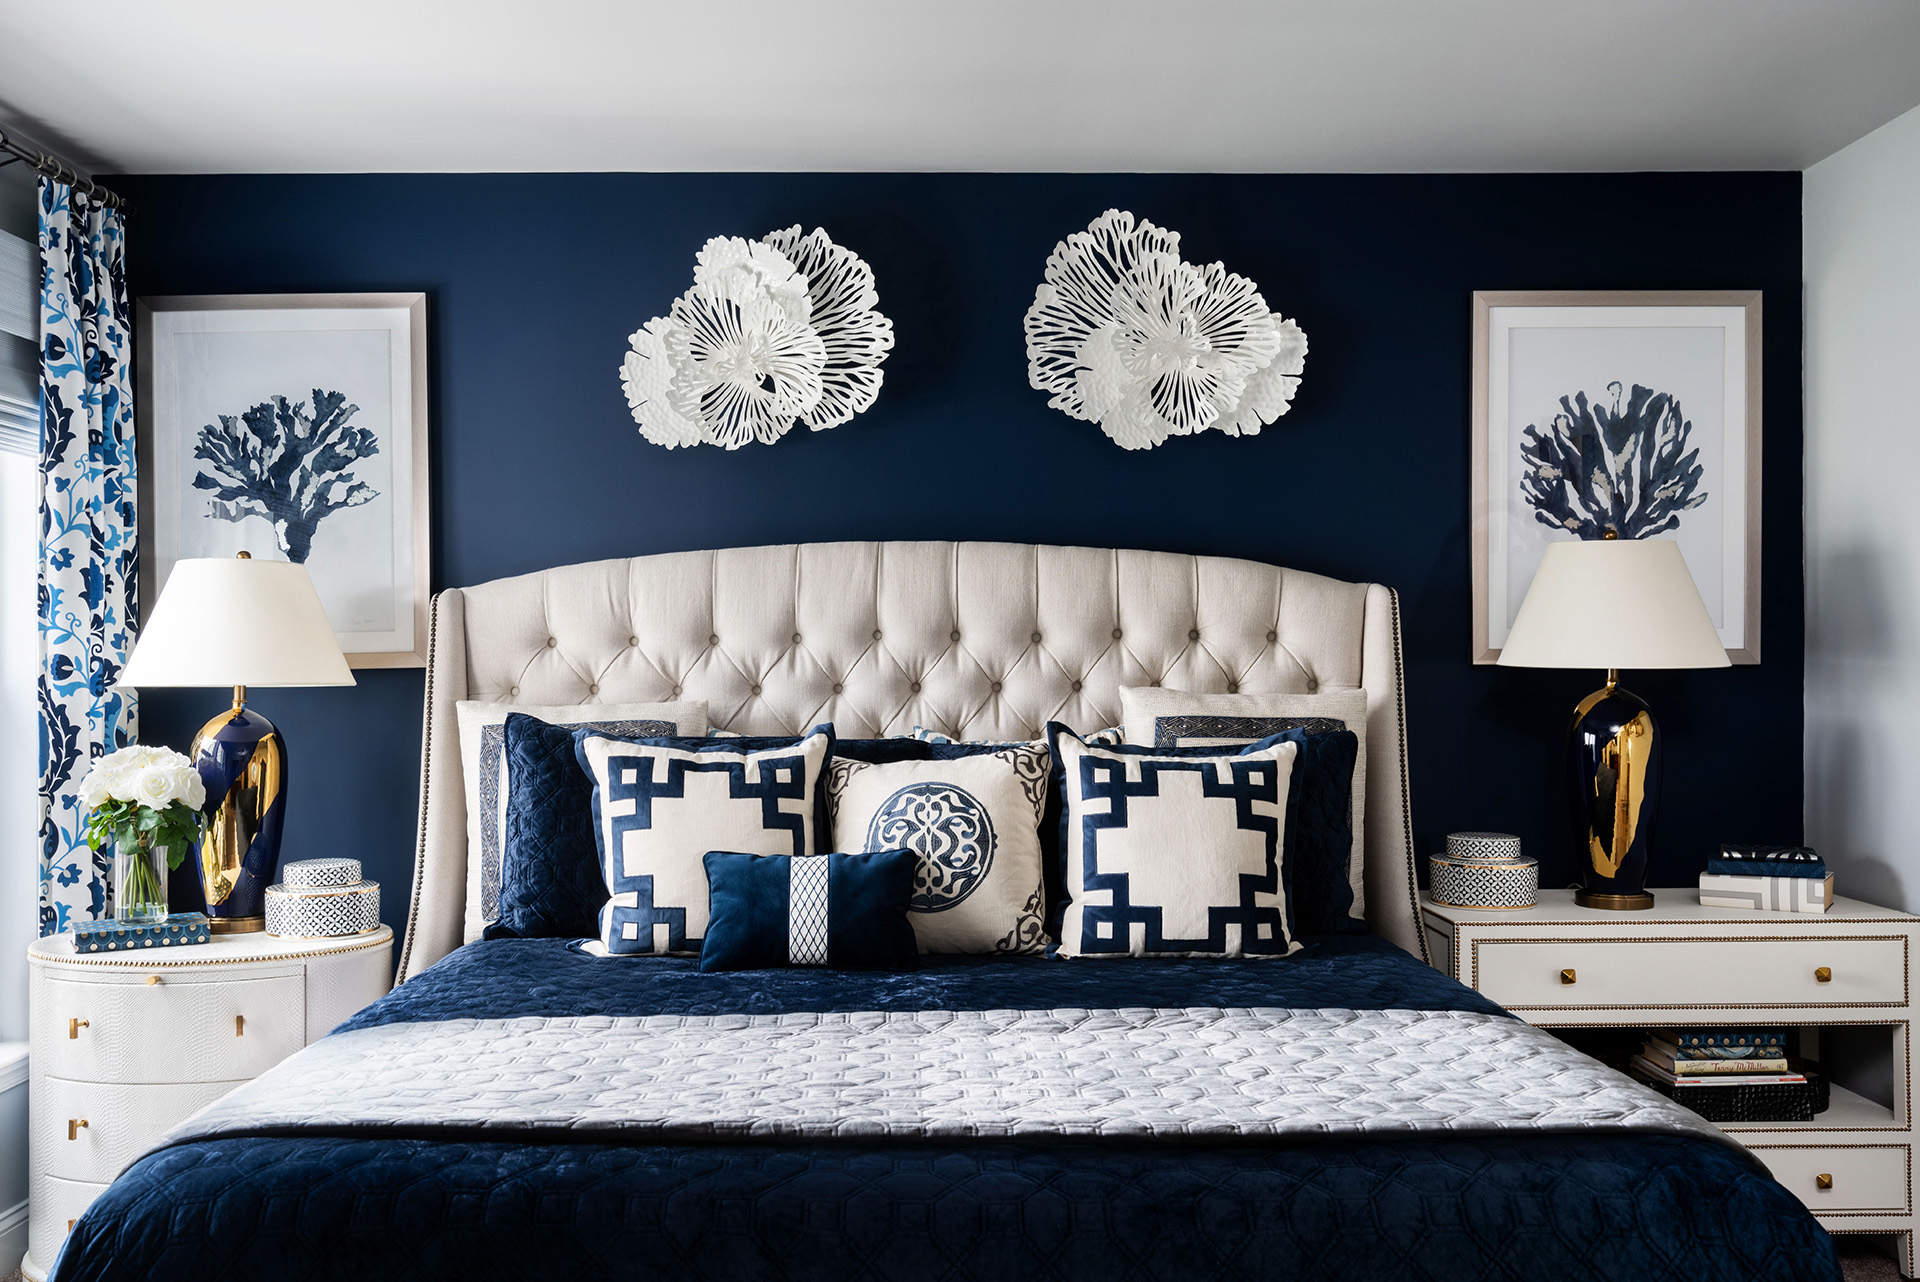 18 fun ways to accent a bedroom wall   Posh Home Designs ...